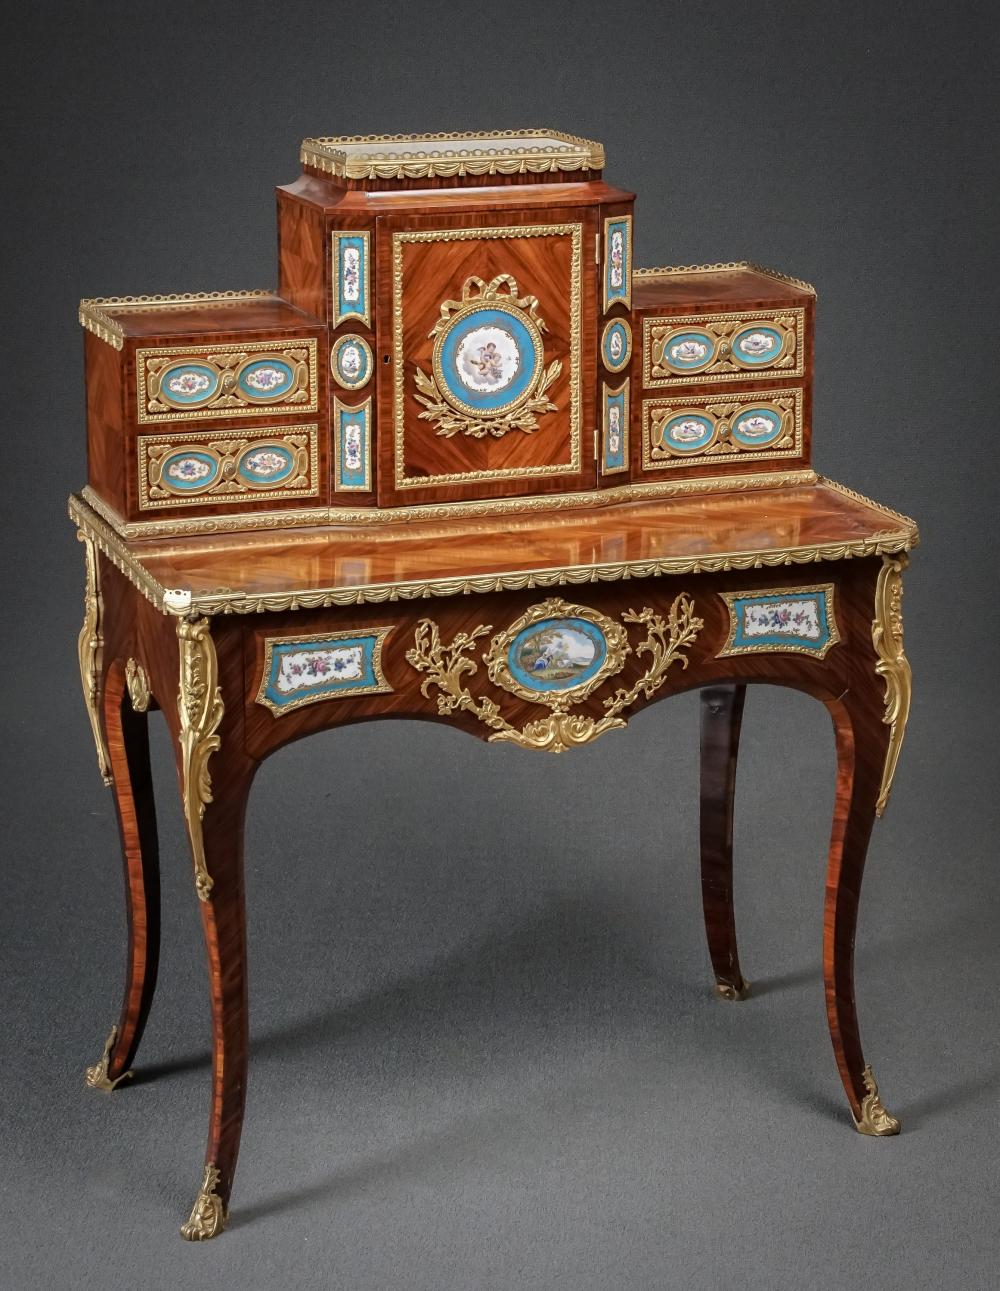 LOUIS XV STYLE ORMOLU AND S VRES 3305b6